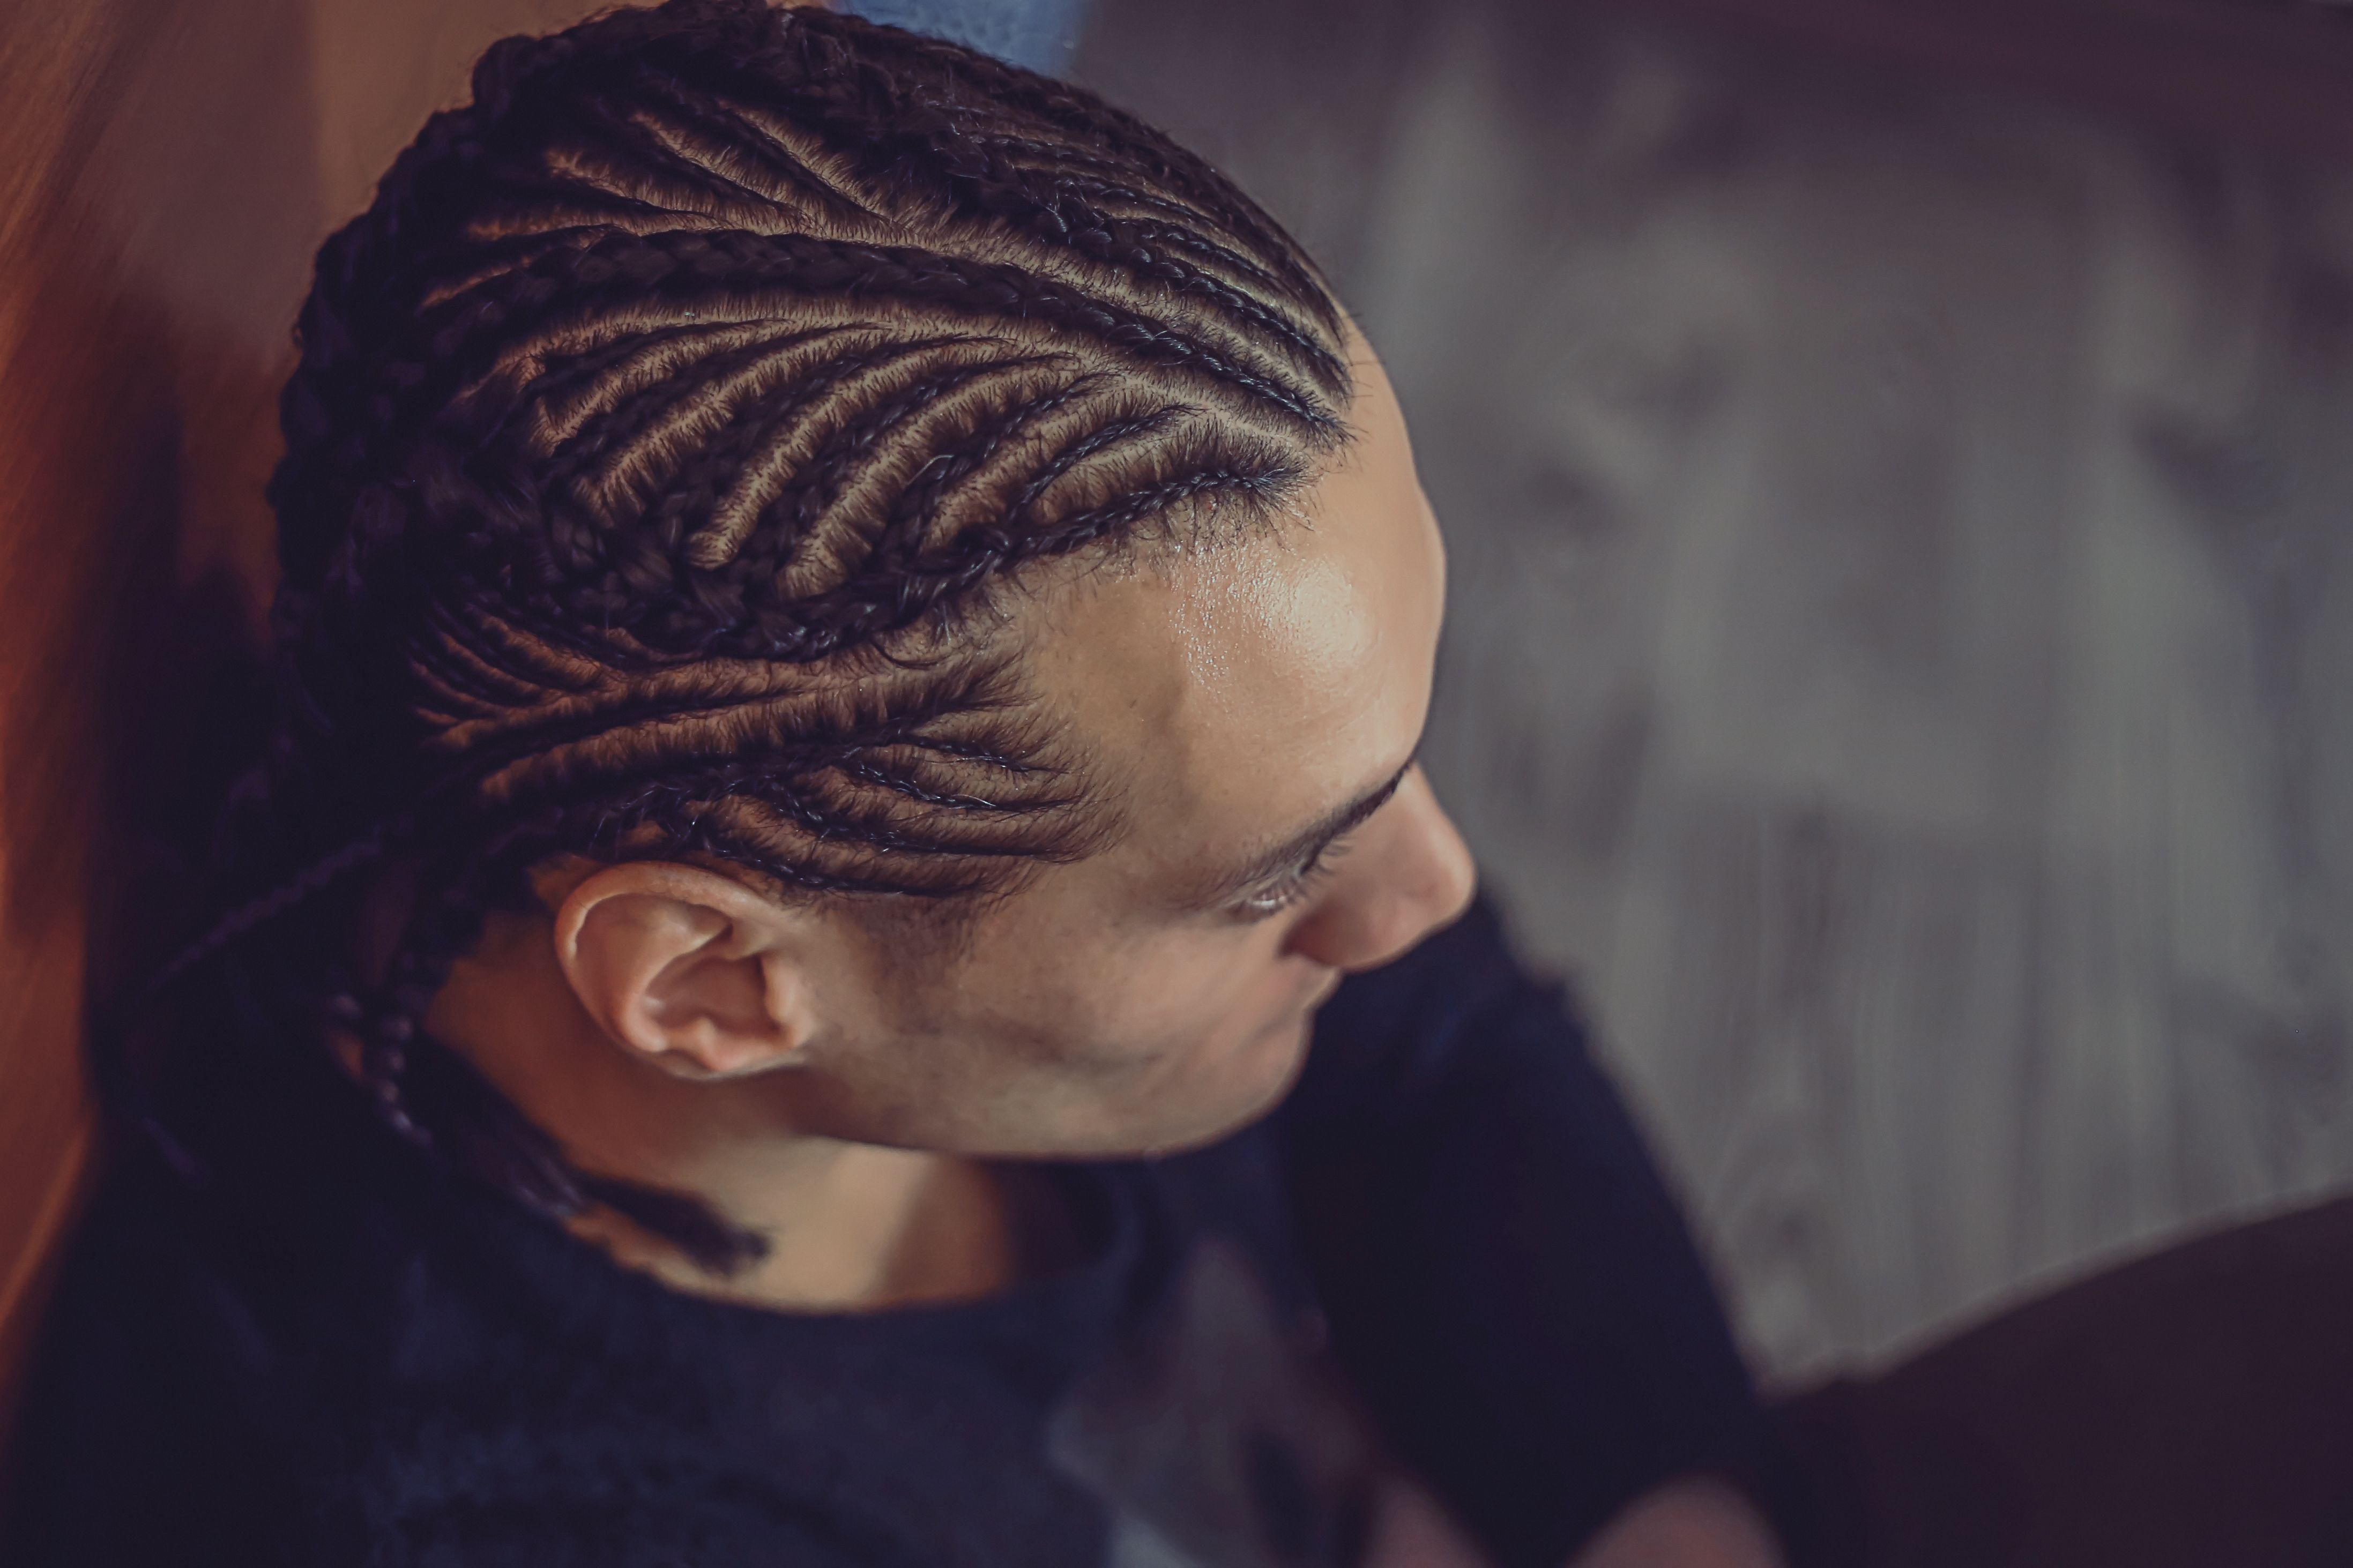 20 Irresistible Braids for Men with Short Hair